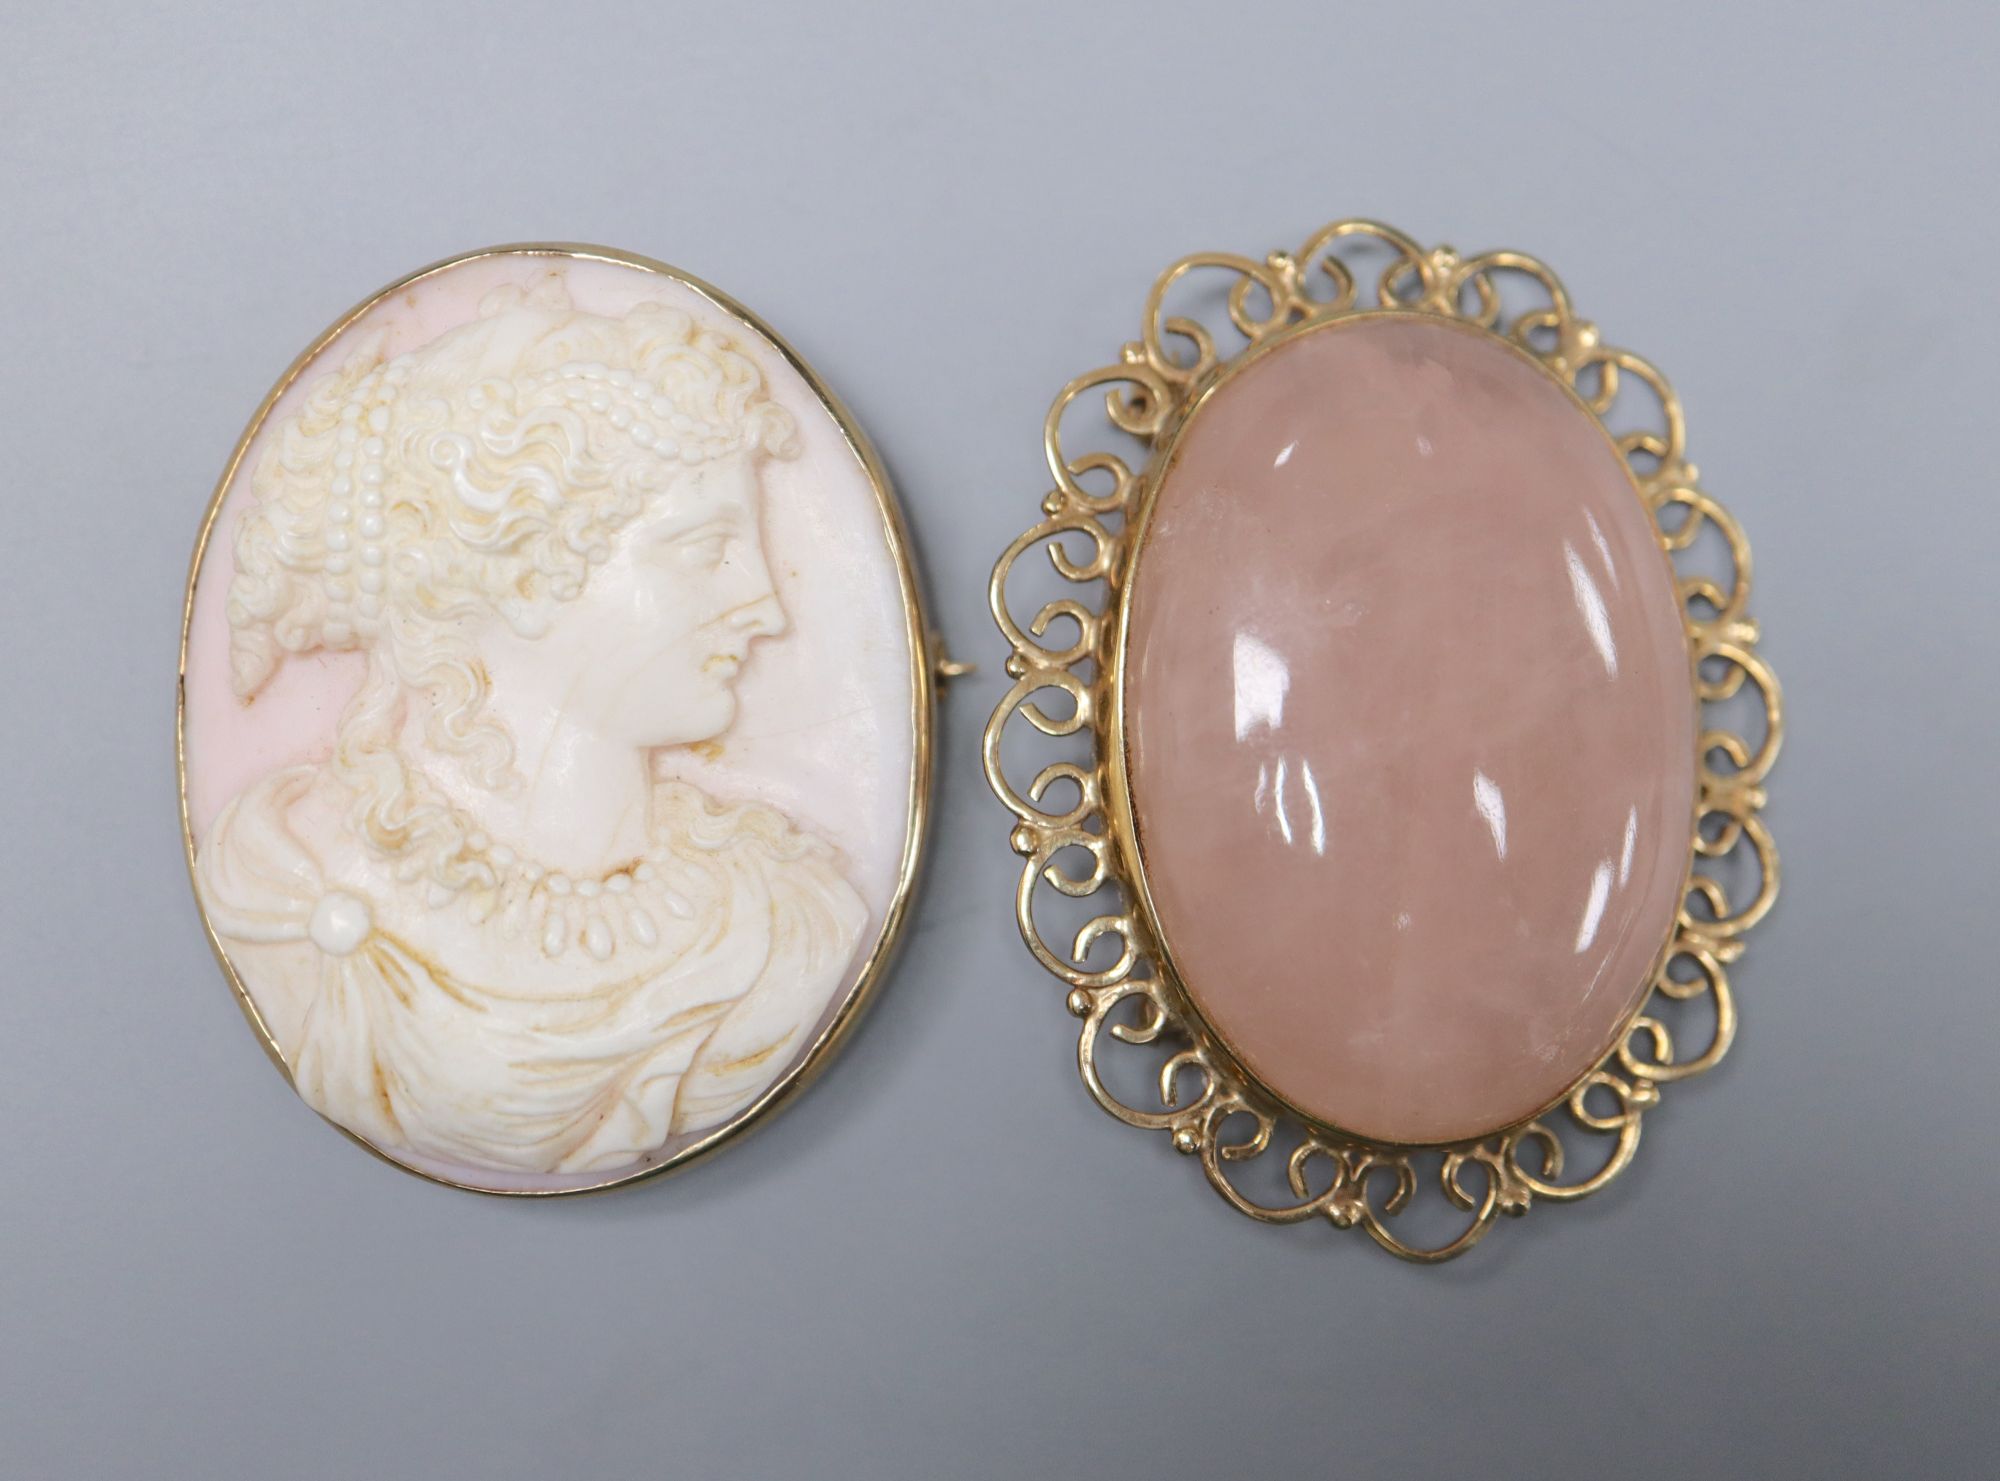 A 9ct gold-framed carved shell cameo portrait brooch and a 9ct gold-framed rose quartz brooch, 46mm, gross 34 grams.